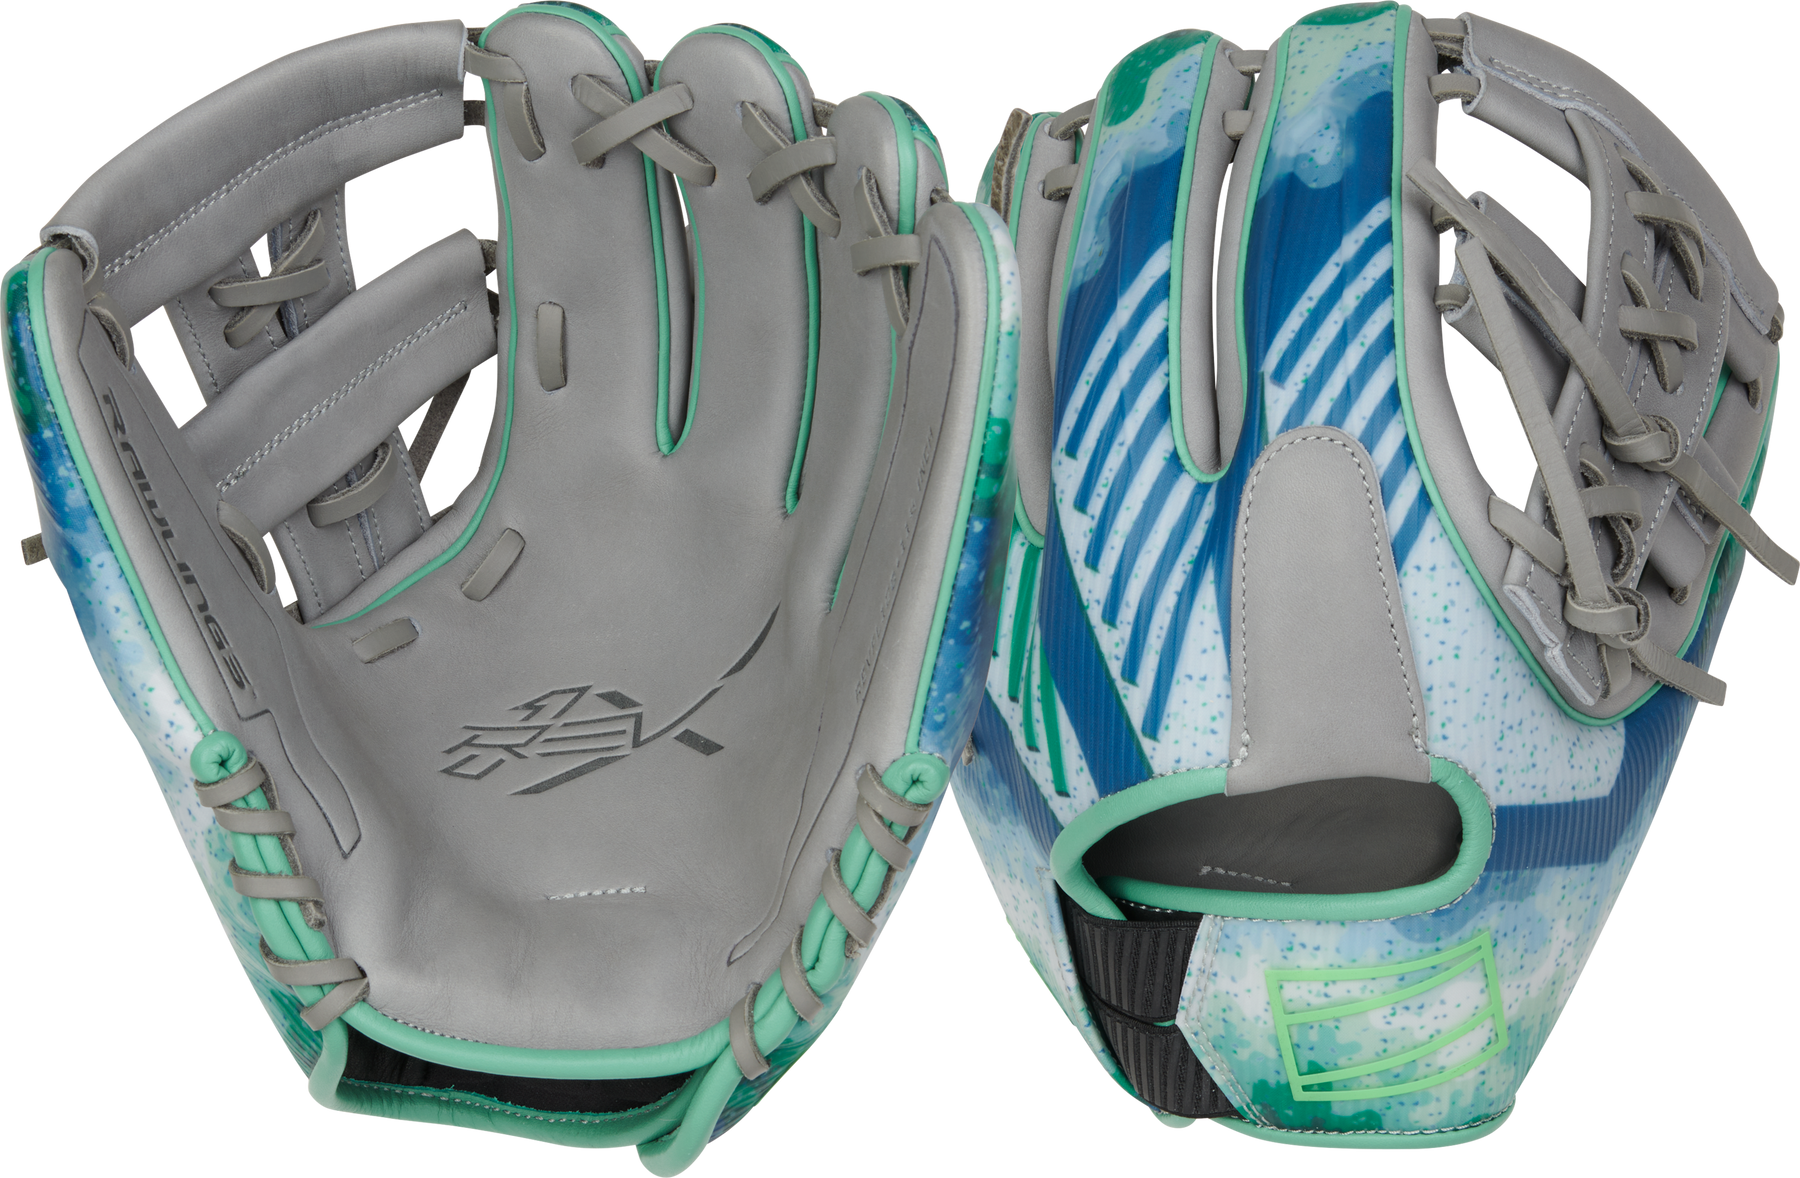 The new limited edition 2022 REV1X is here! The 11.75 inch glove features a  unique design and a special Francisco Lindor branding. Shop for…